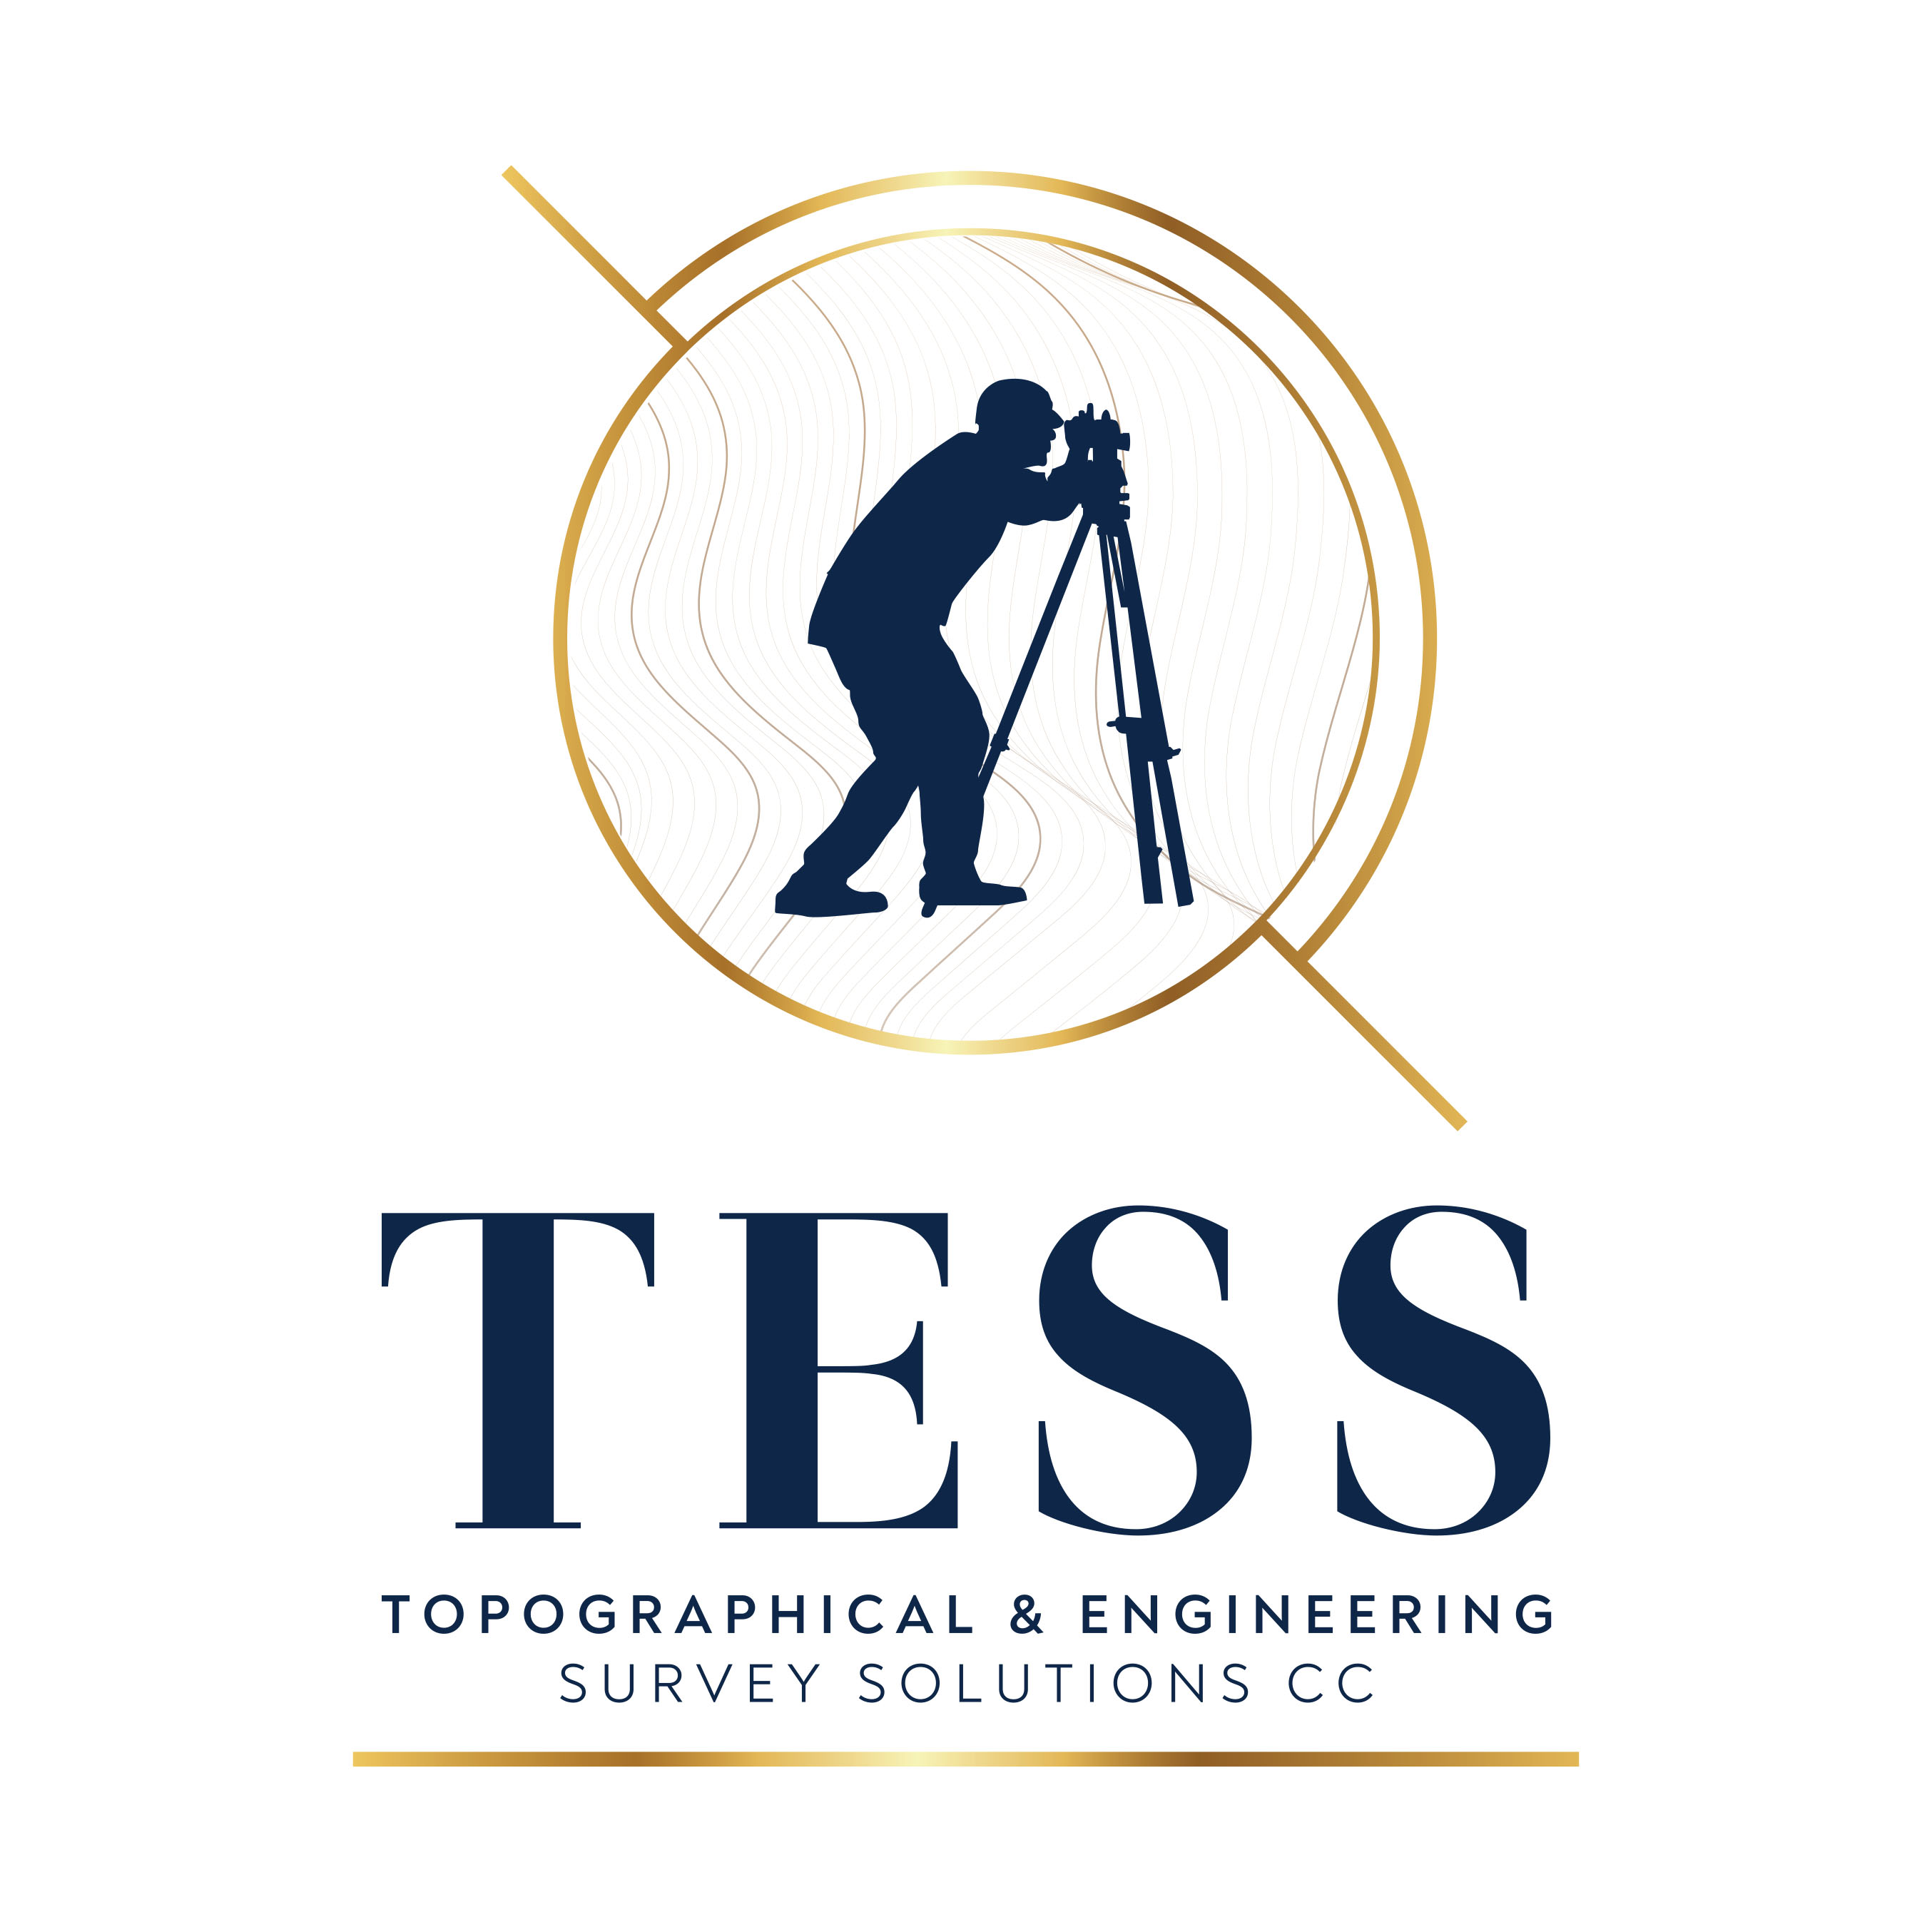 Topographical & Engineering Survey Solutions